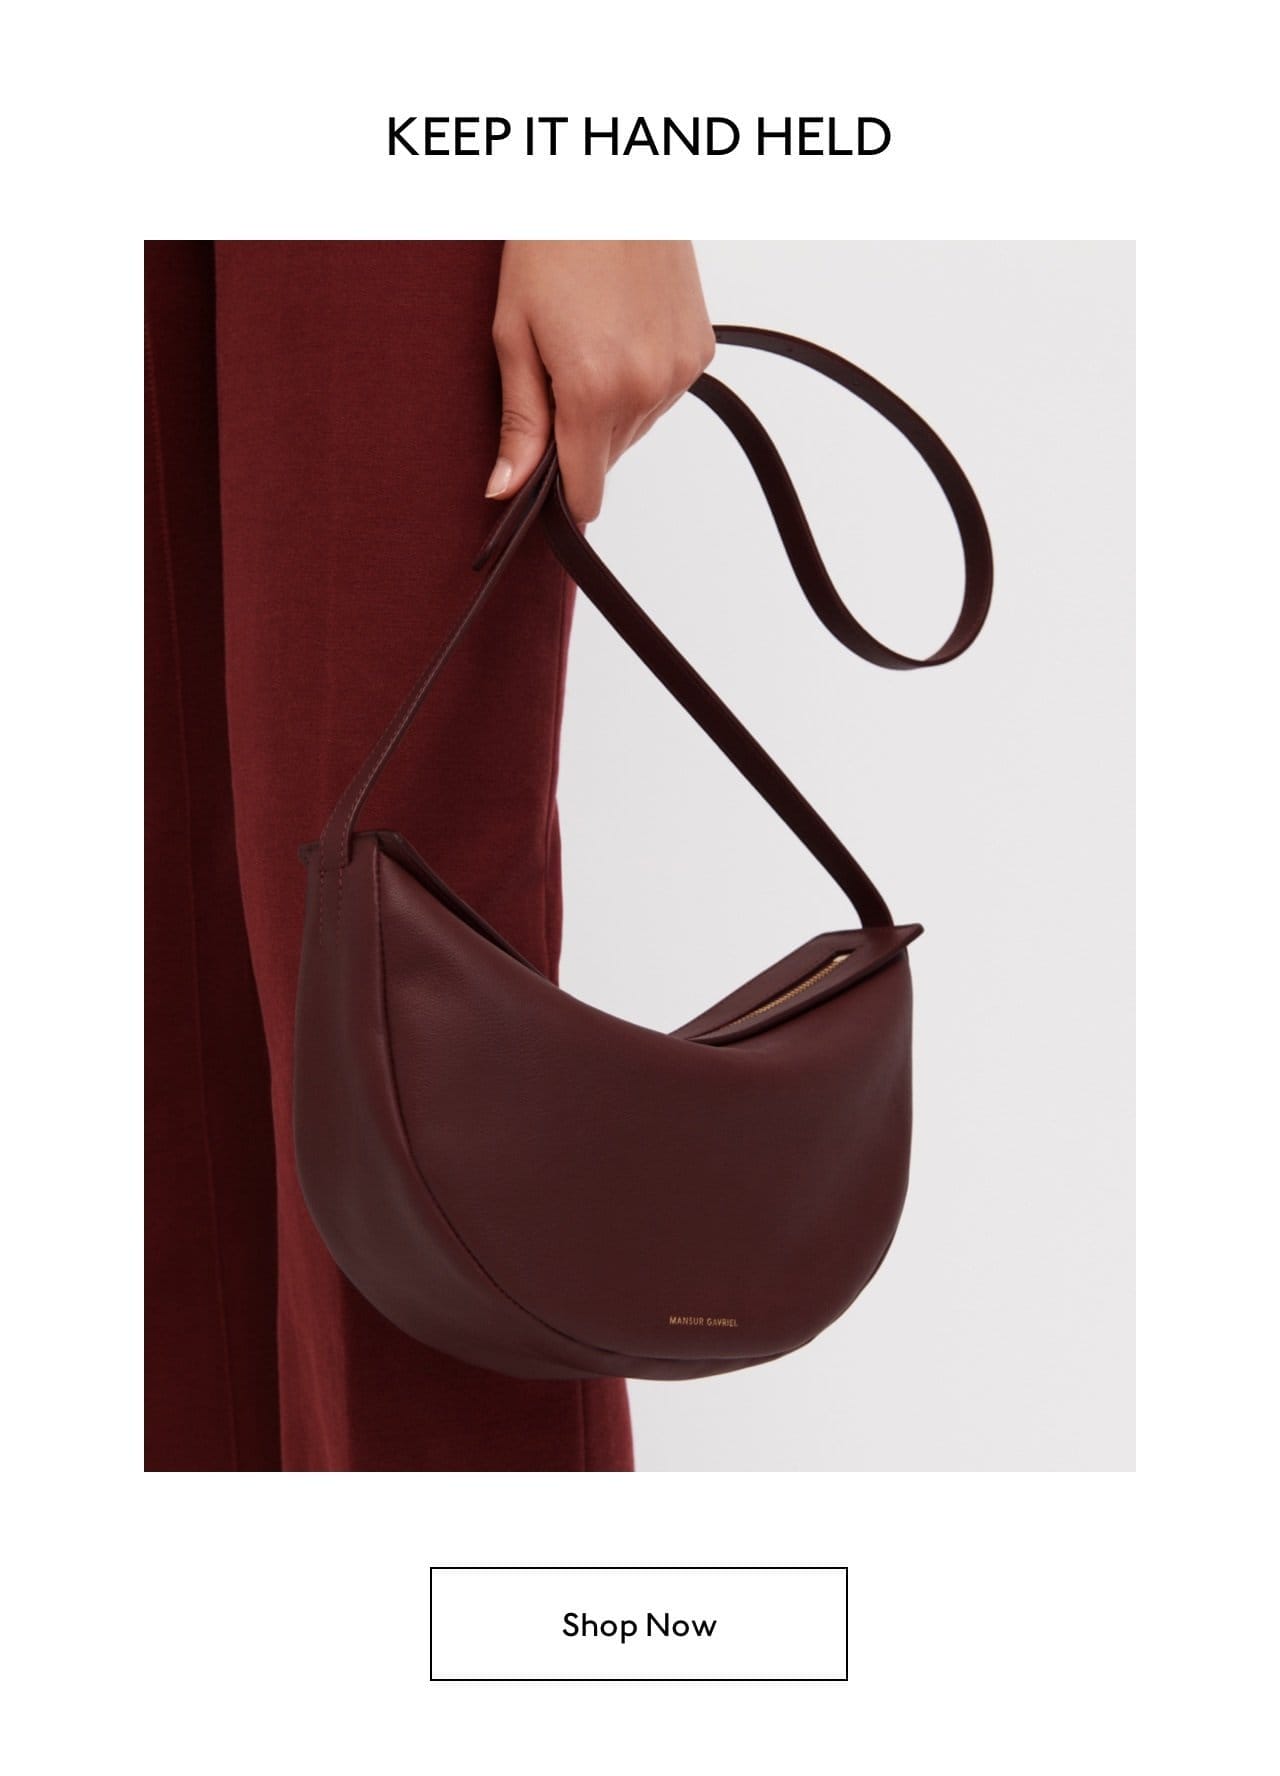 Wear as a crossbody, tucked under your arm, or keep it handheld. Shop the Moon Sling now.